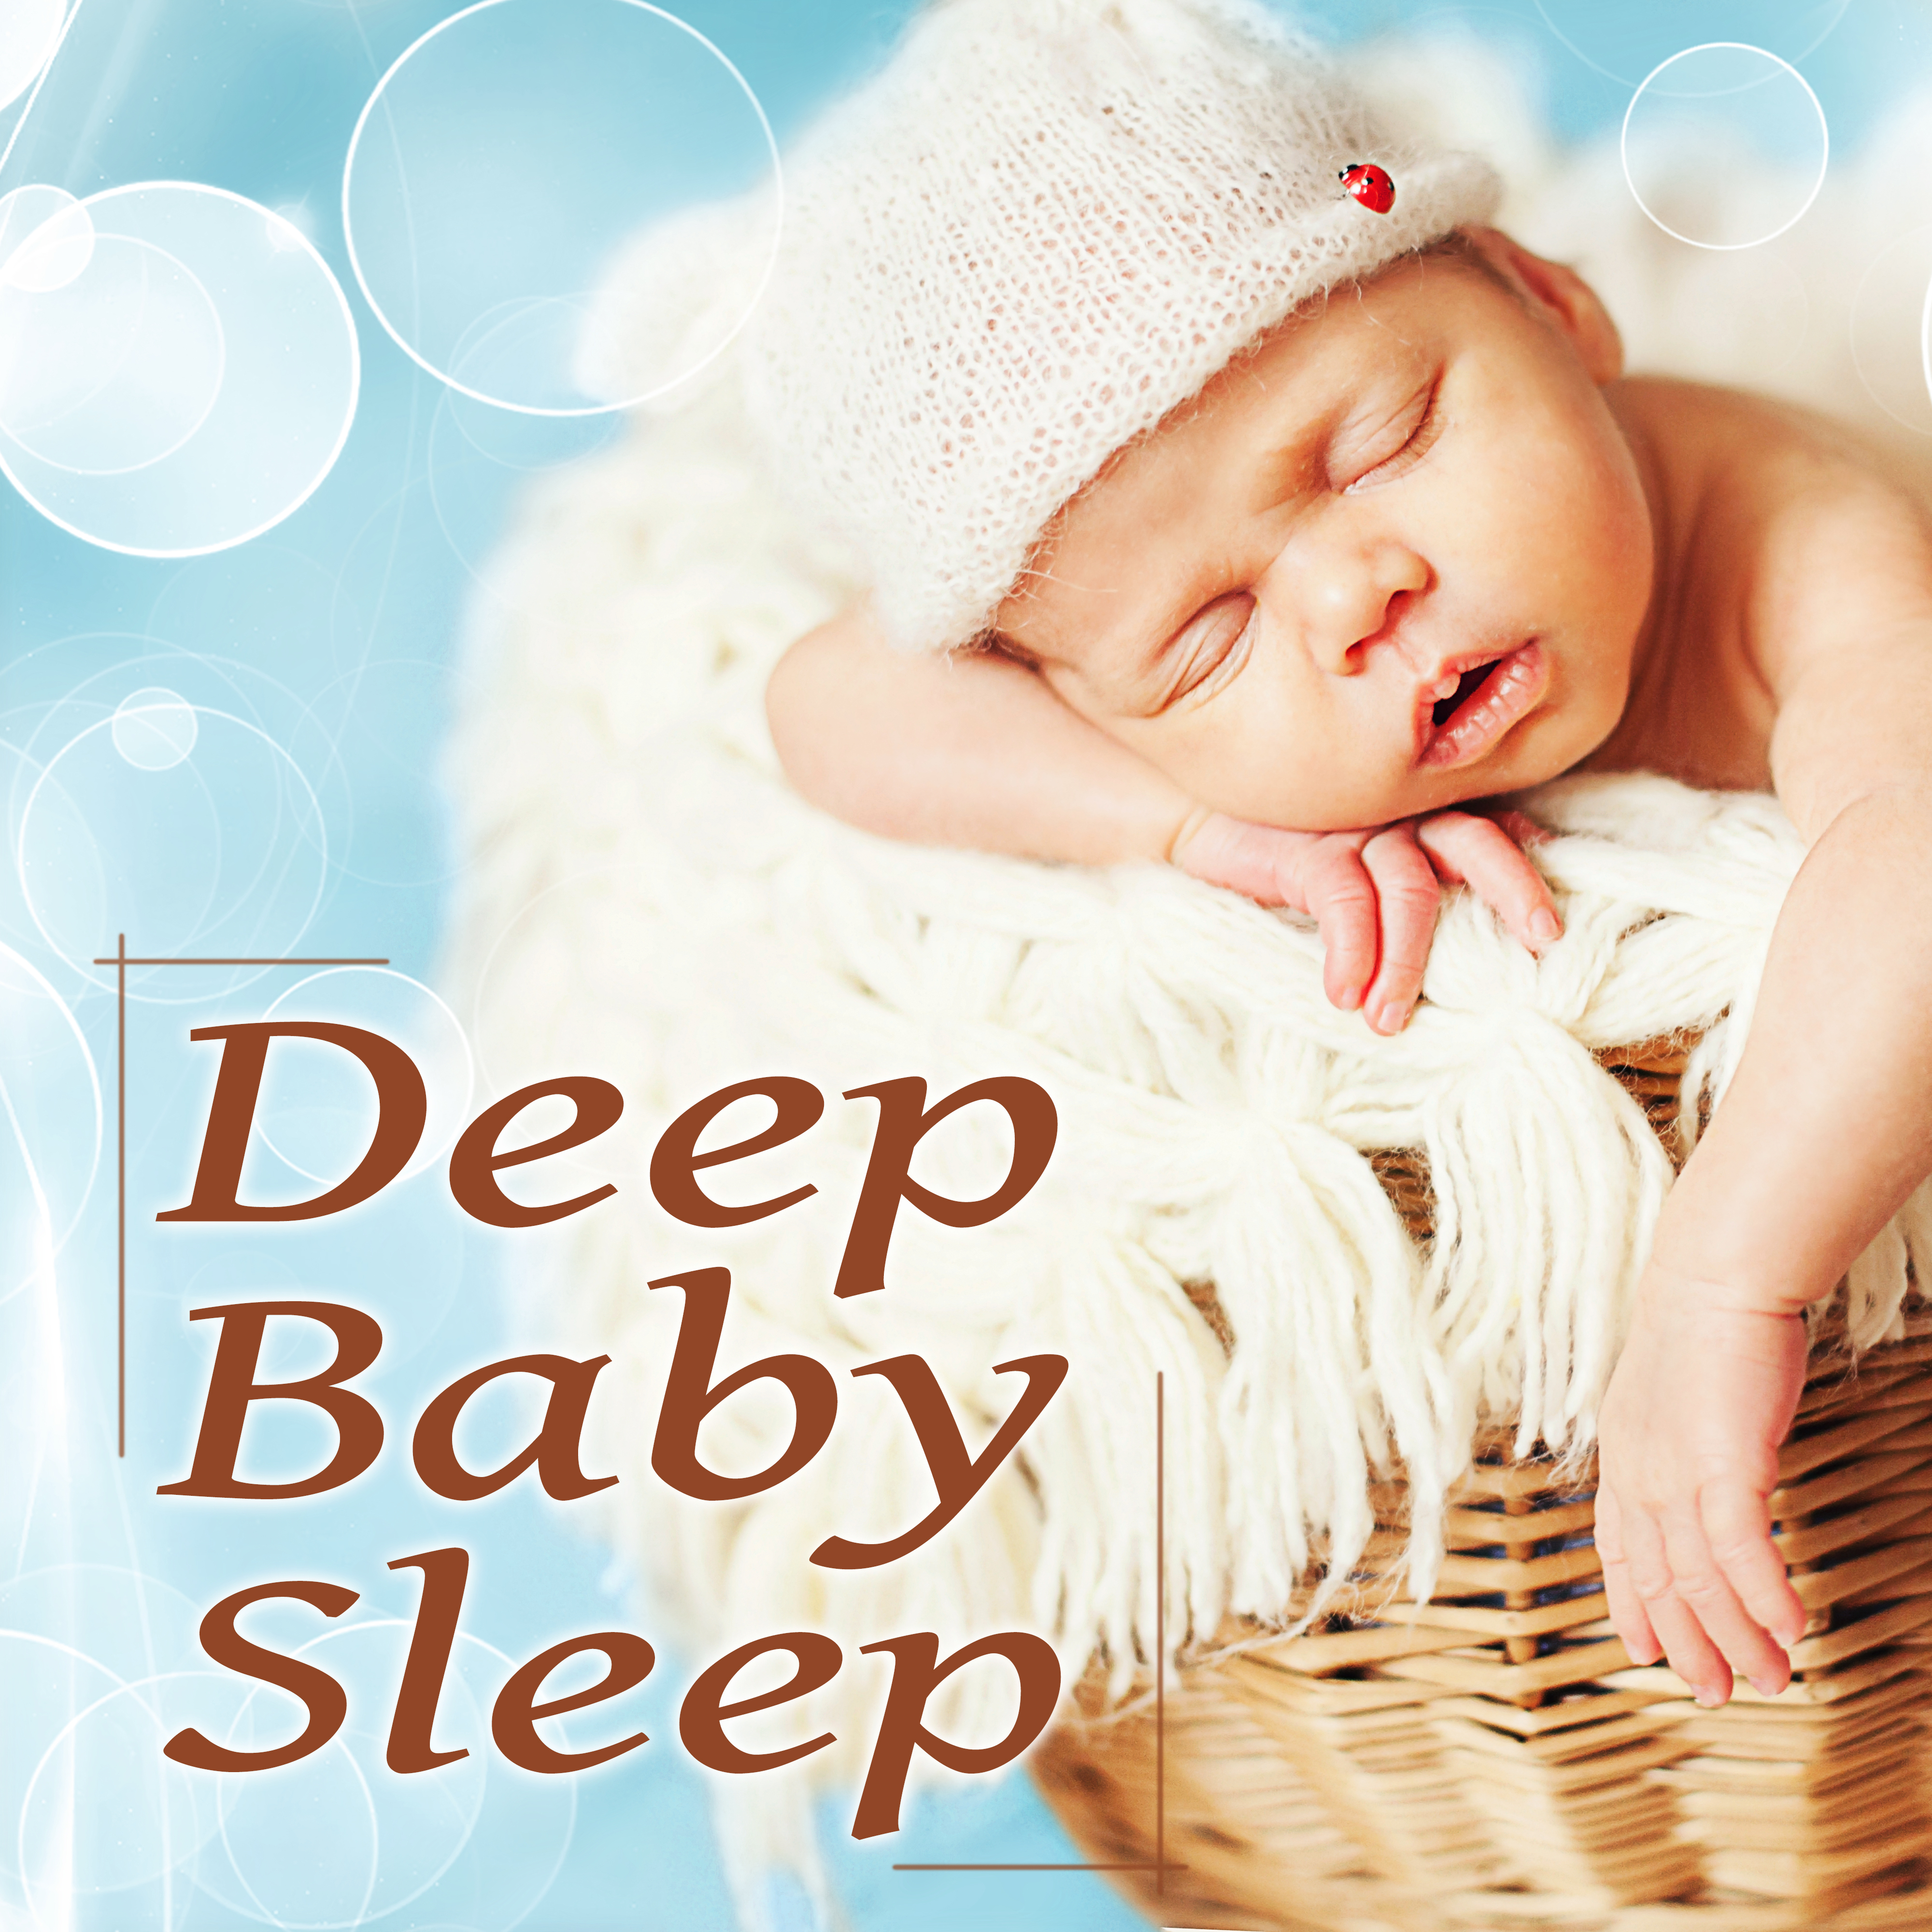 Deep Baby Sleep – Cozy & Warm Sleep Music, Total Relax, Stop Crying, Fall Asleep Faster, Bedtime Lullaby Songs for Babies